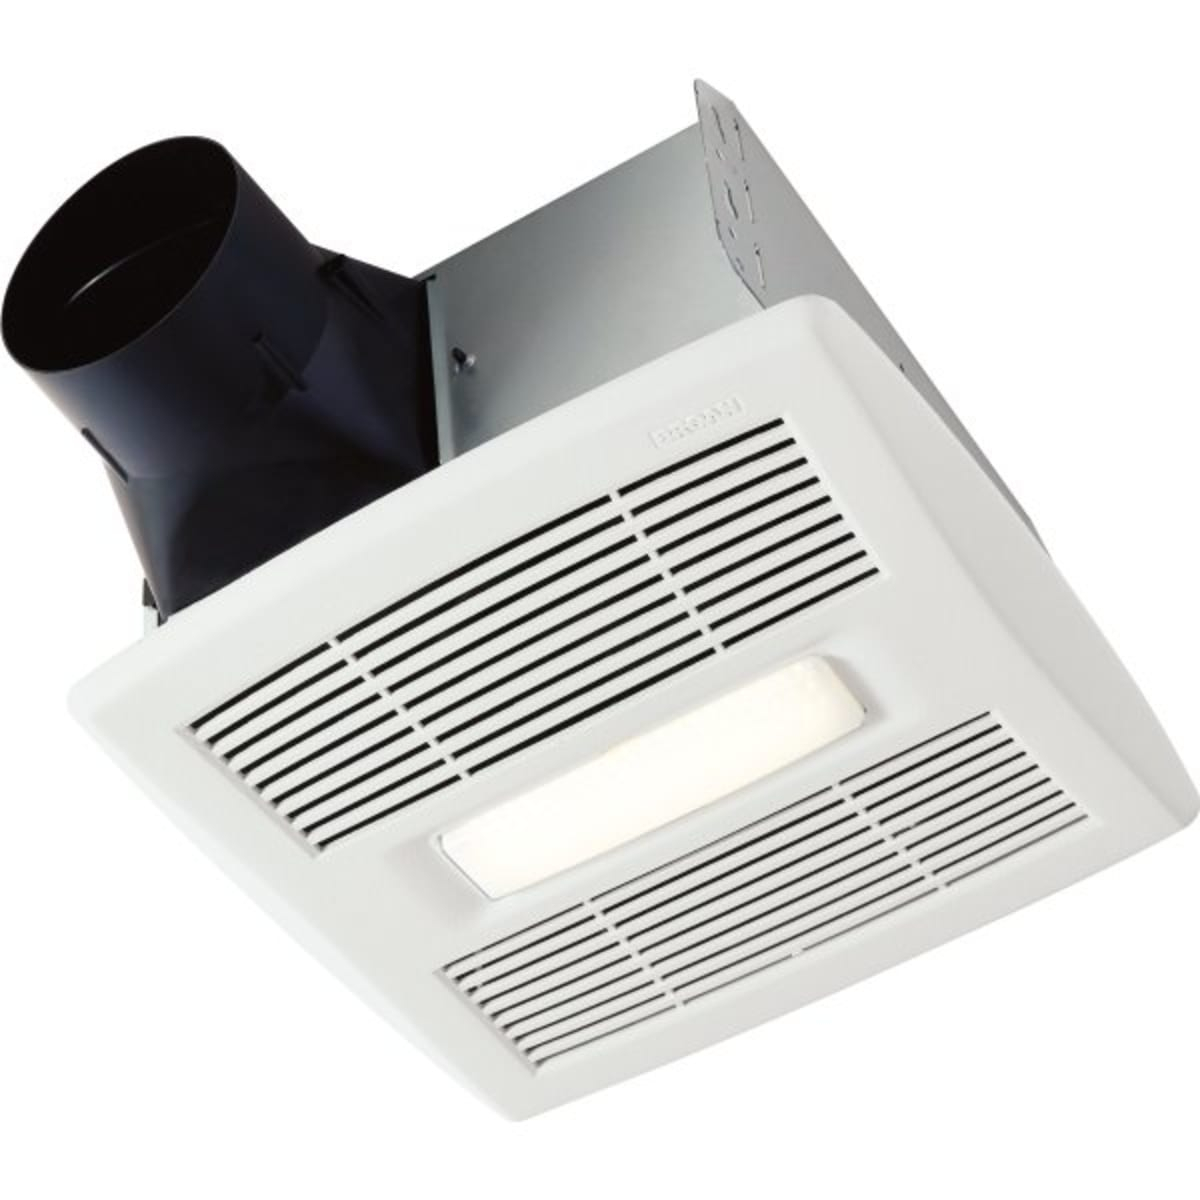 Exhaust Fans Hd Supply throughout proportions 1200 X 1200